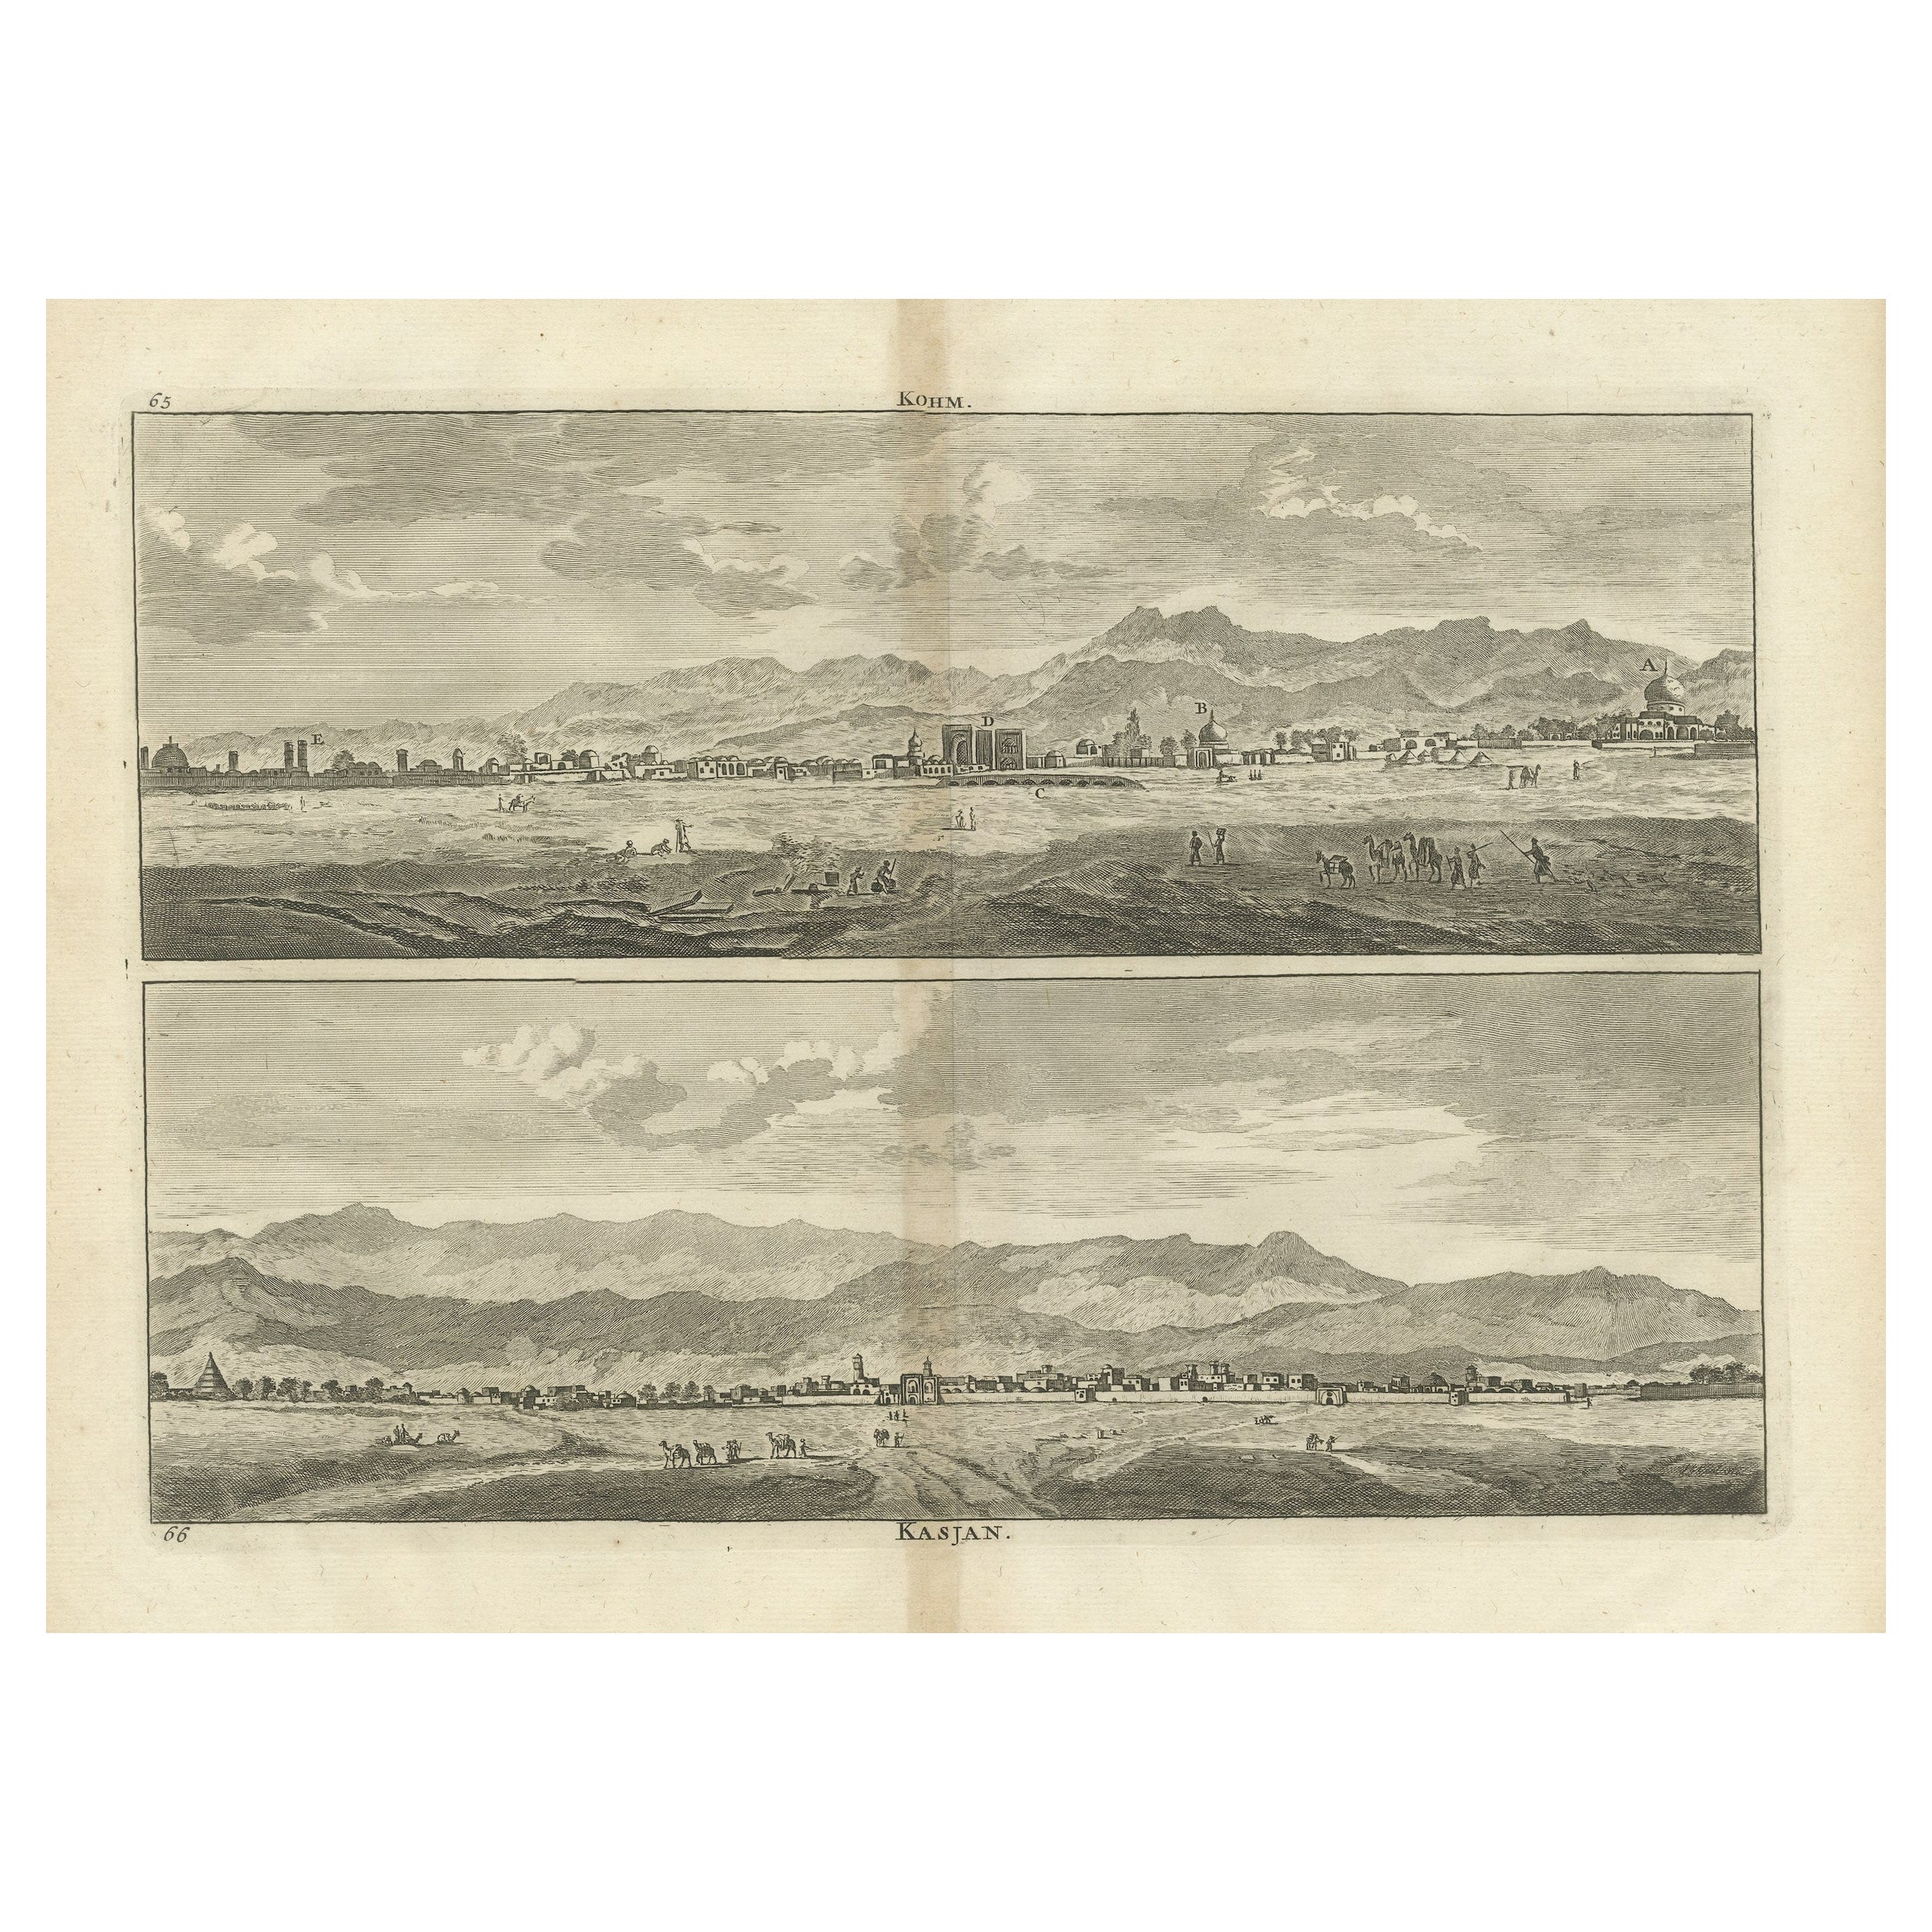 Antique Print with Views of Qom and Kashan, Persia, Iran